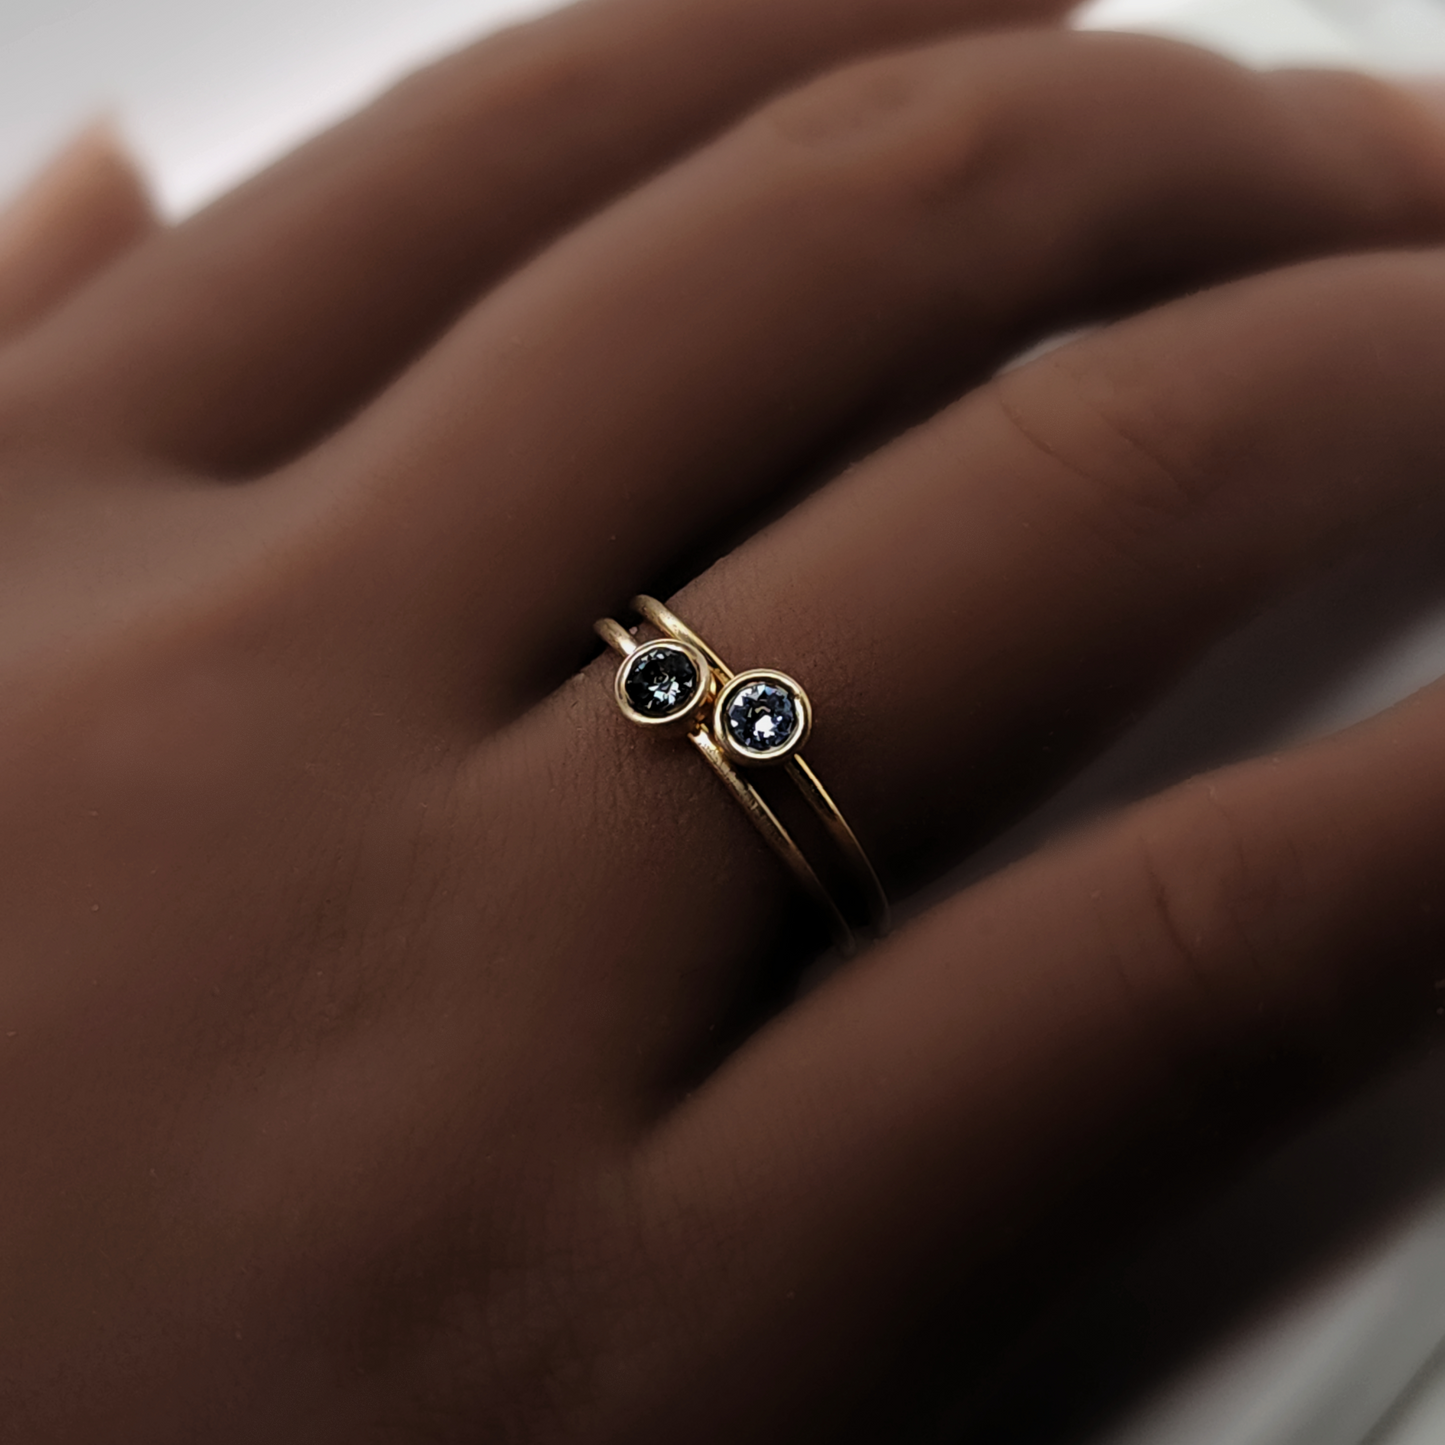 Large January Birthstone Ring - Going Golden